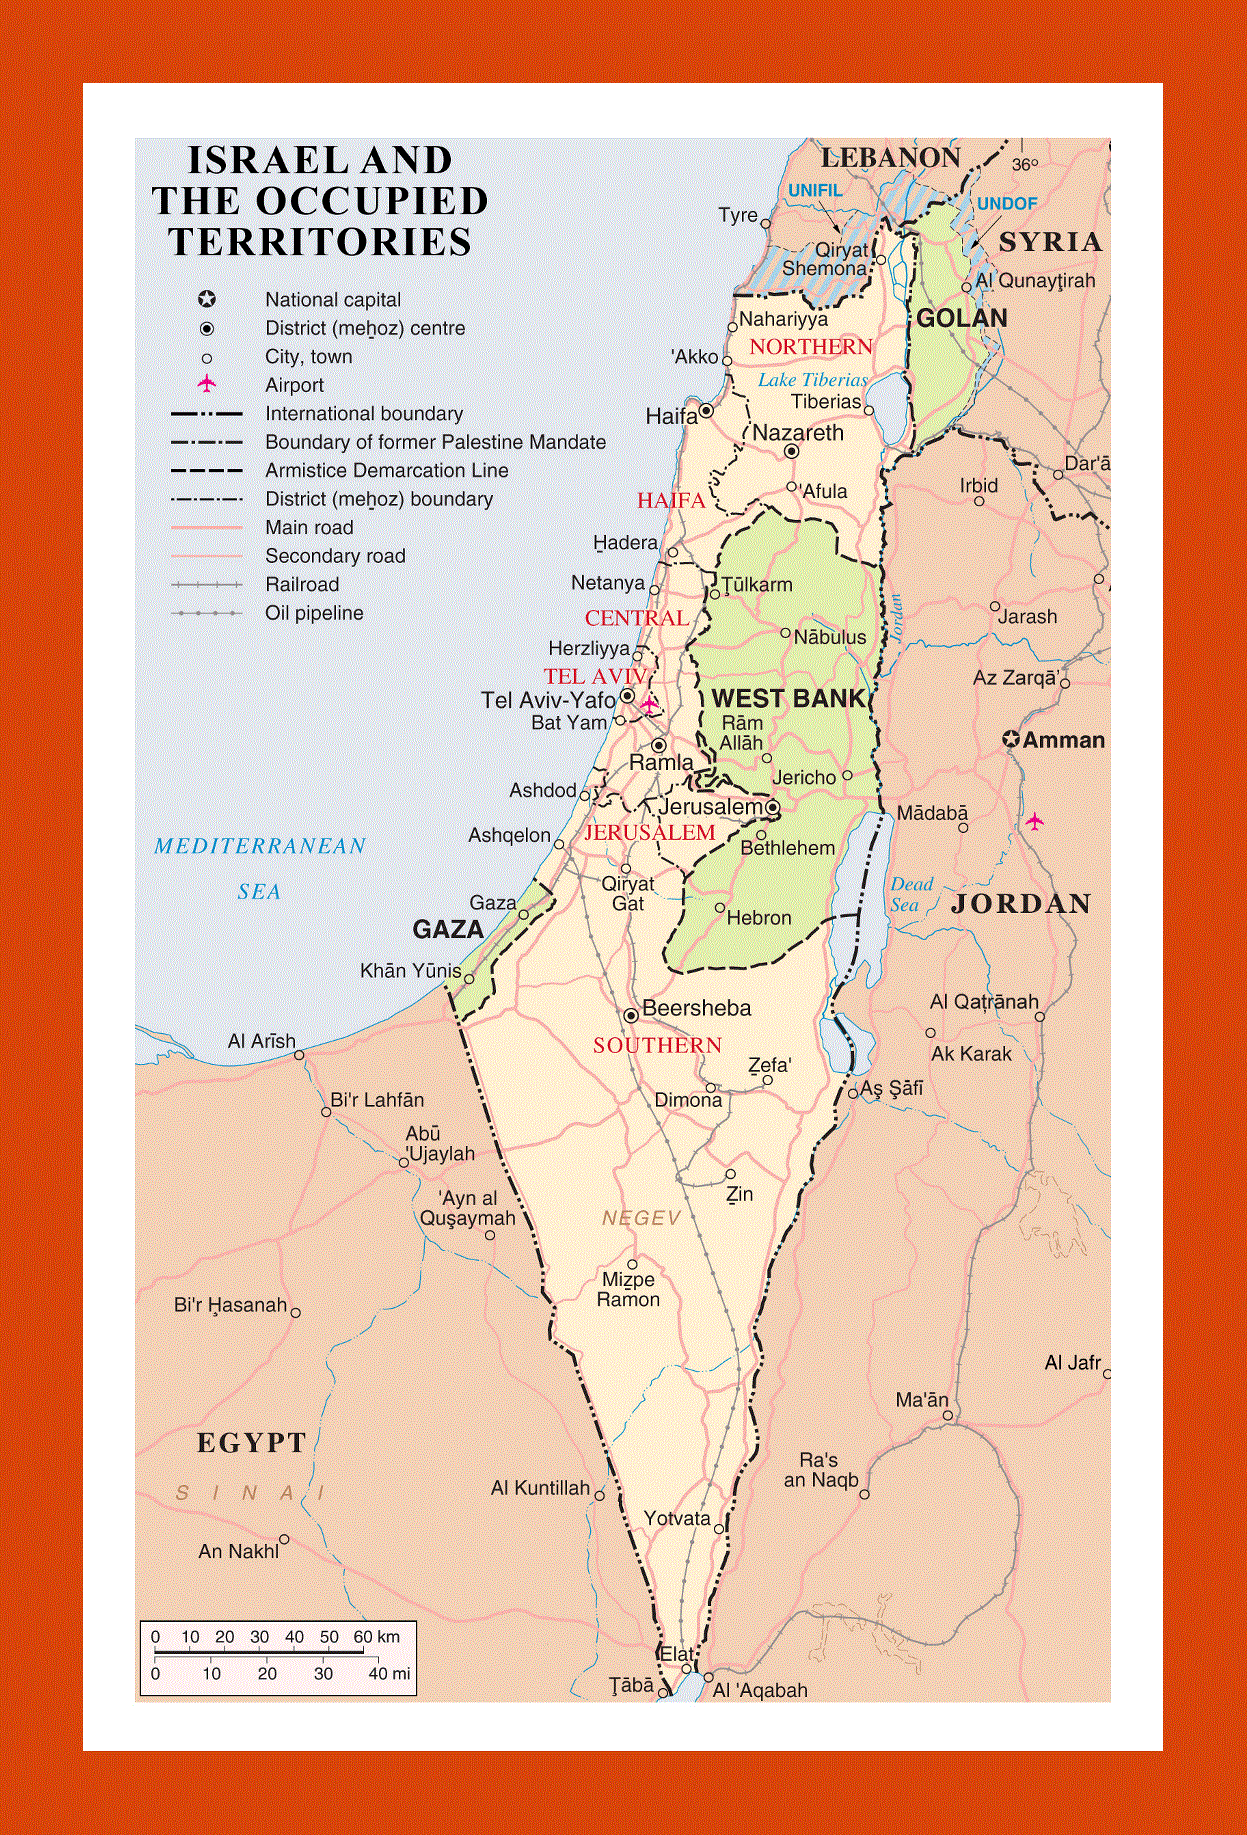 Political and administrative map of Israel and the occupied territories